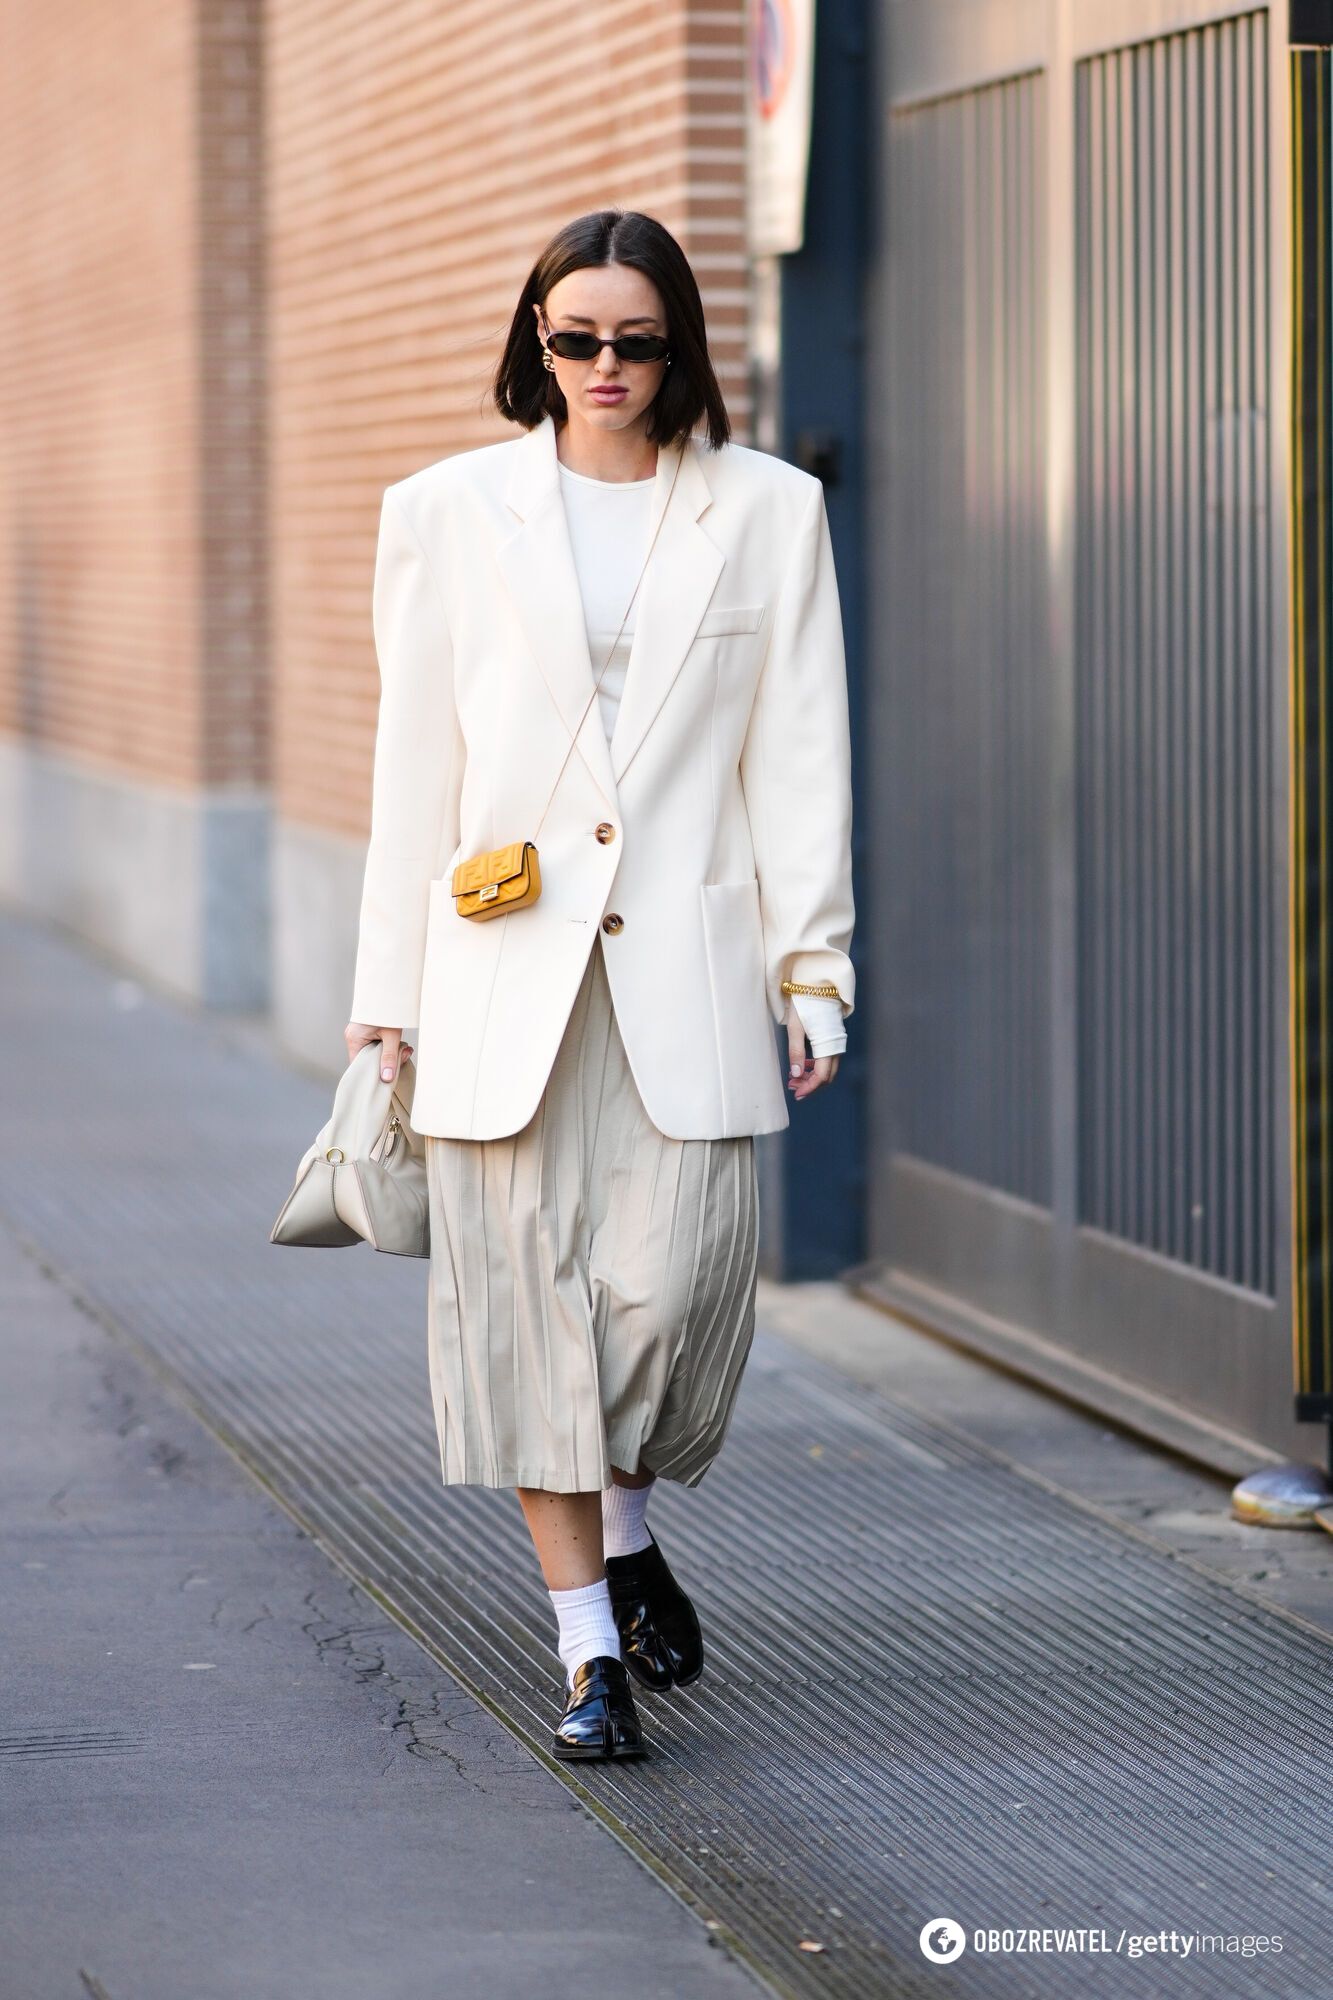 What to wear with midi skirts: 5 stylish combinations that add lightness to the look